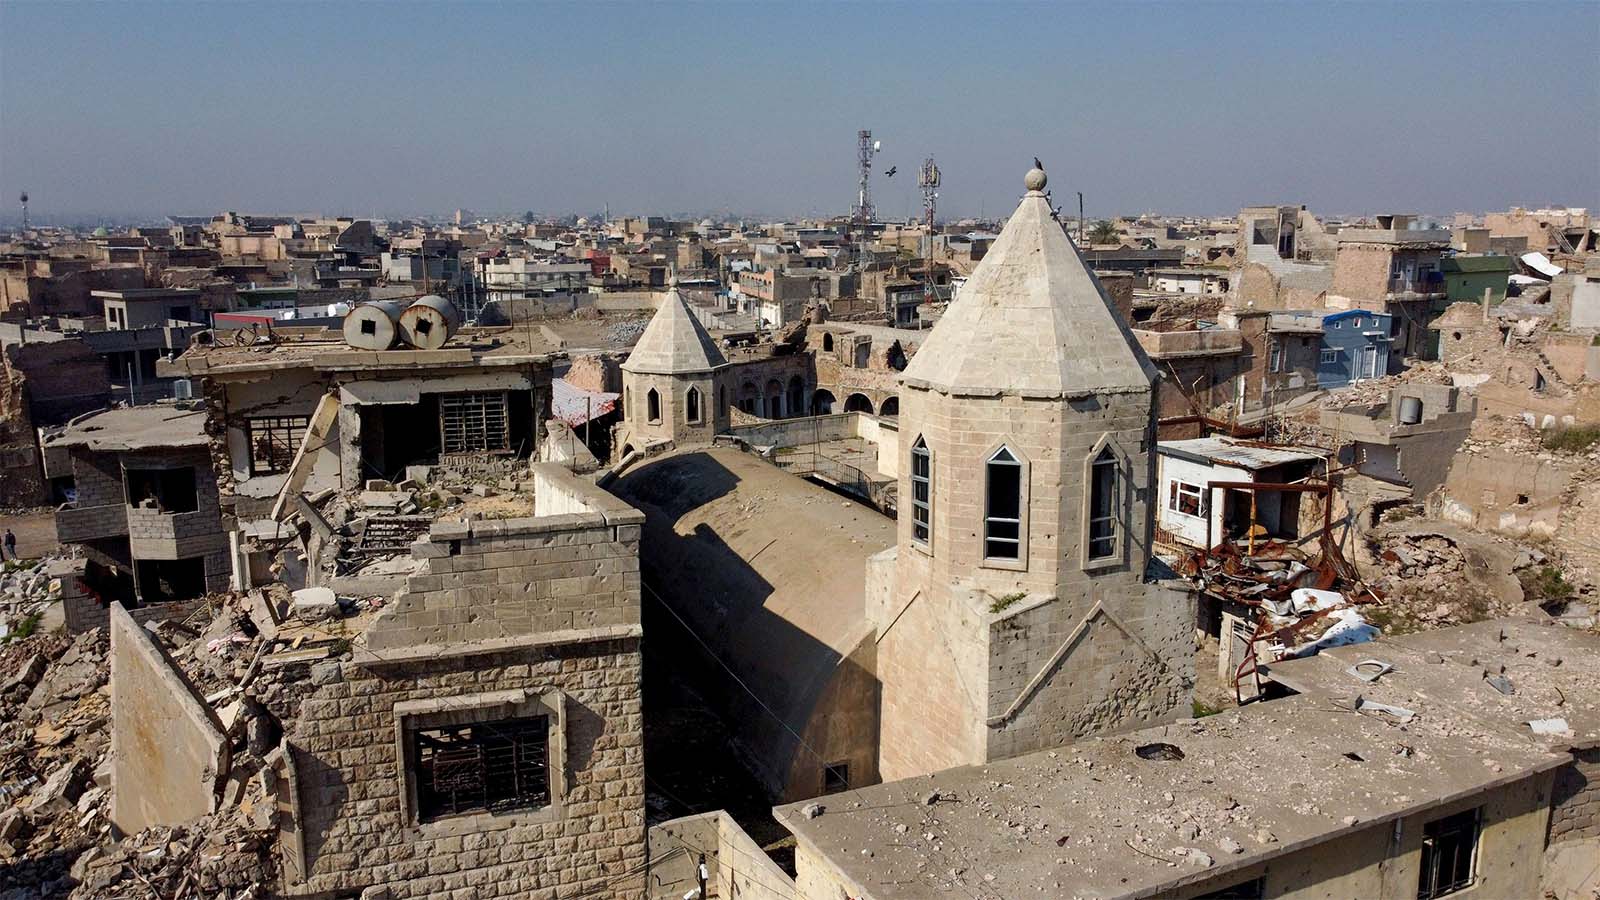 A view of the old city of Mosul and buildings destroyed during past fighting with Islamic State militants